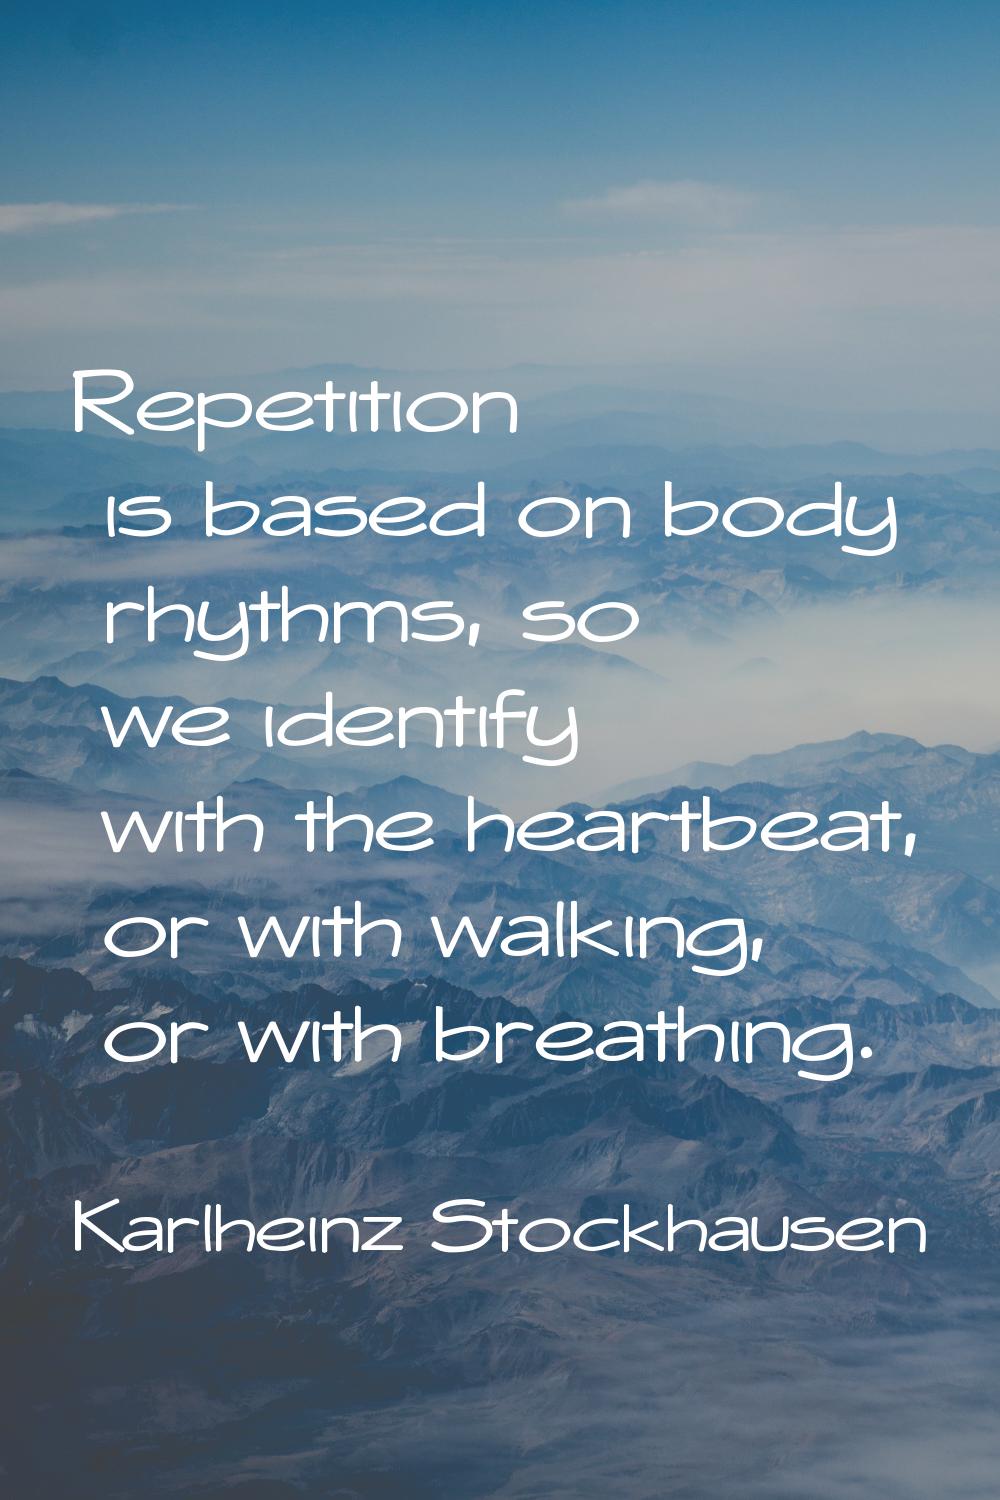 Repetition is based on body rhythms, so we identify with the heartbeat, or with walking, or with br